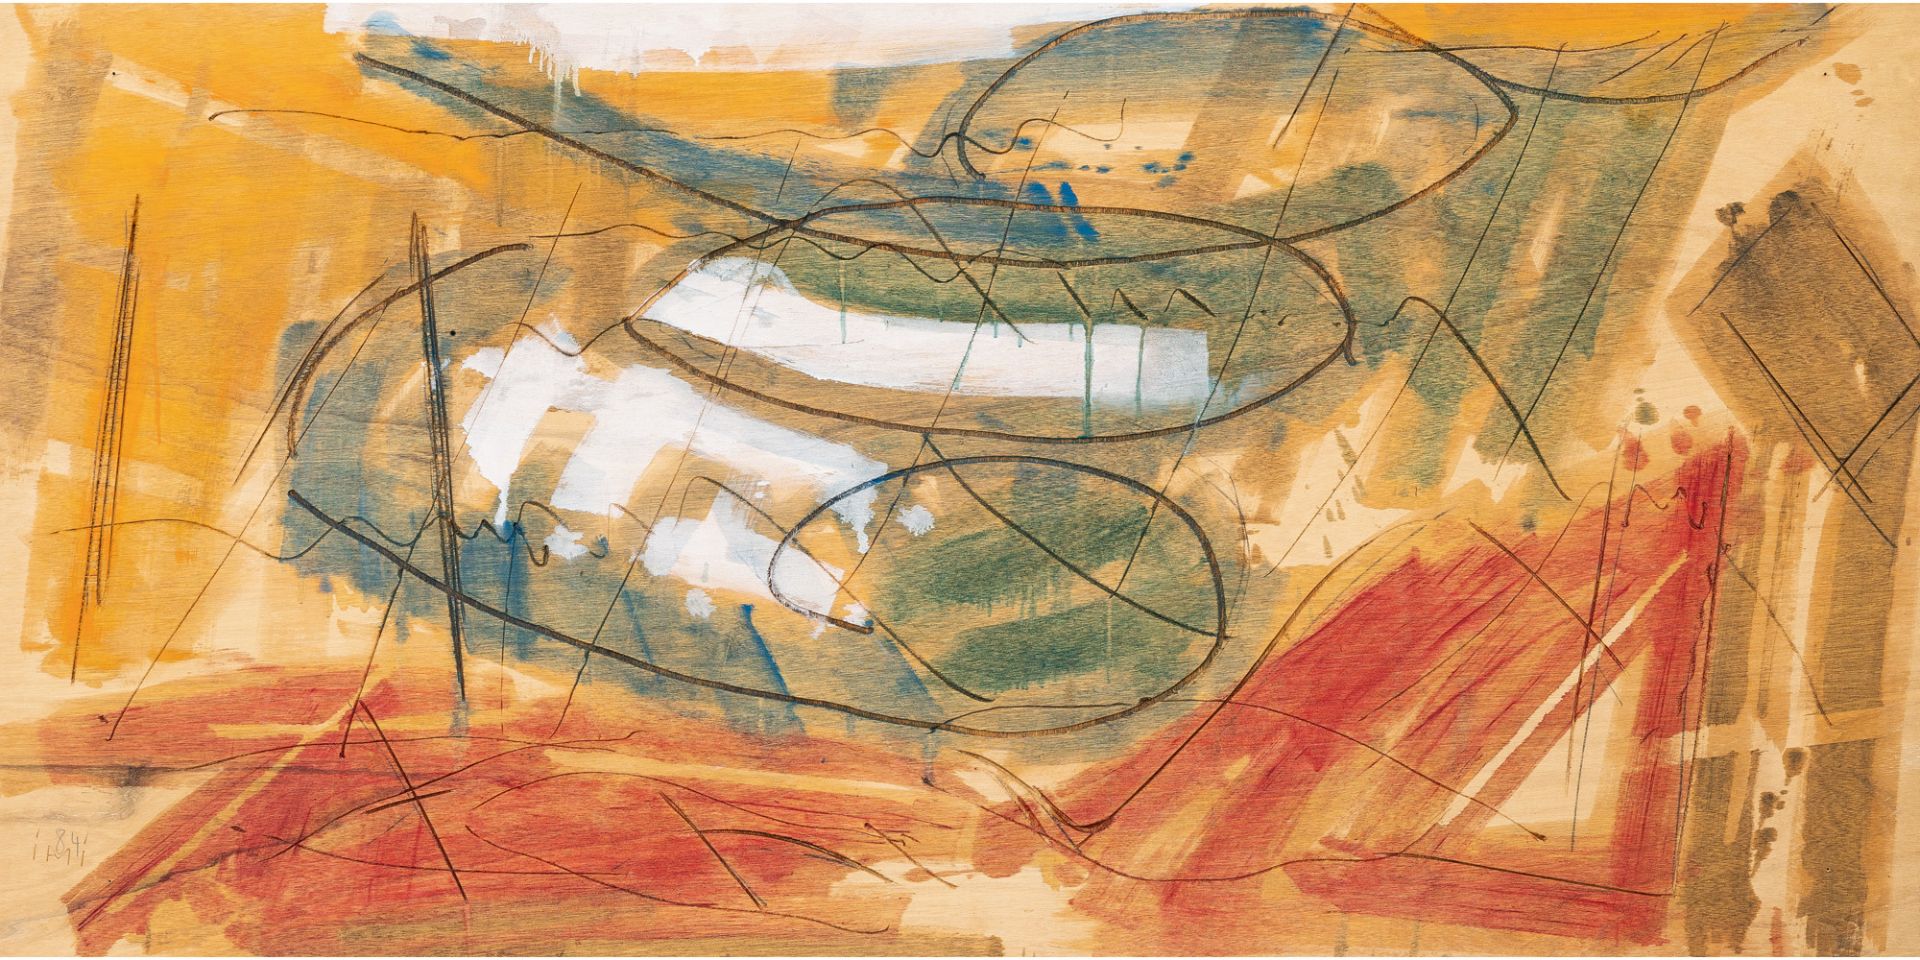 Imi Knoebel (1940 Dessau), Untitled (Composition)Acrylic on panel, partially incised. (19)84. Ca.